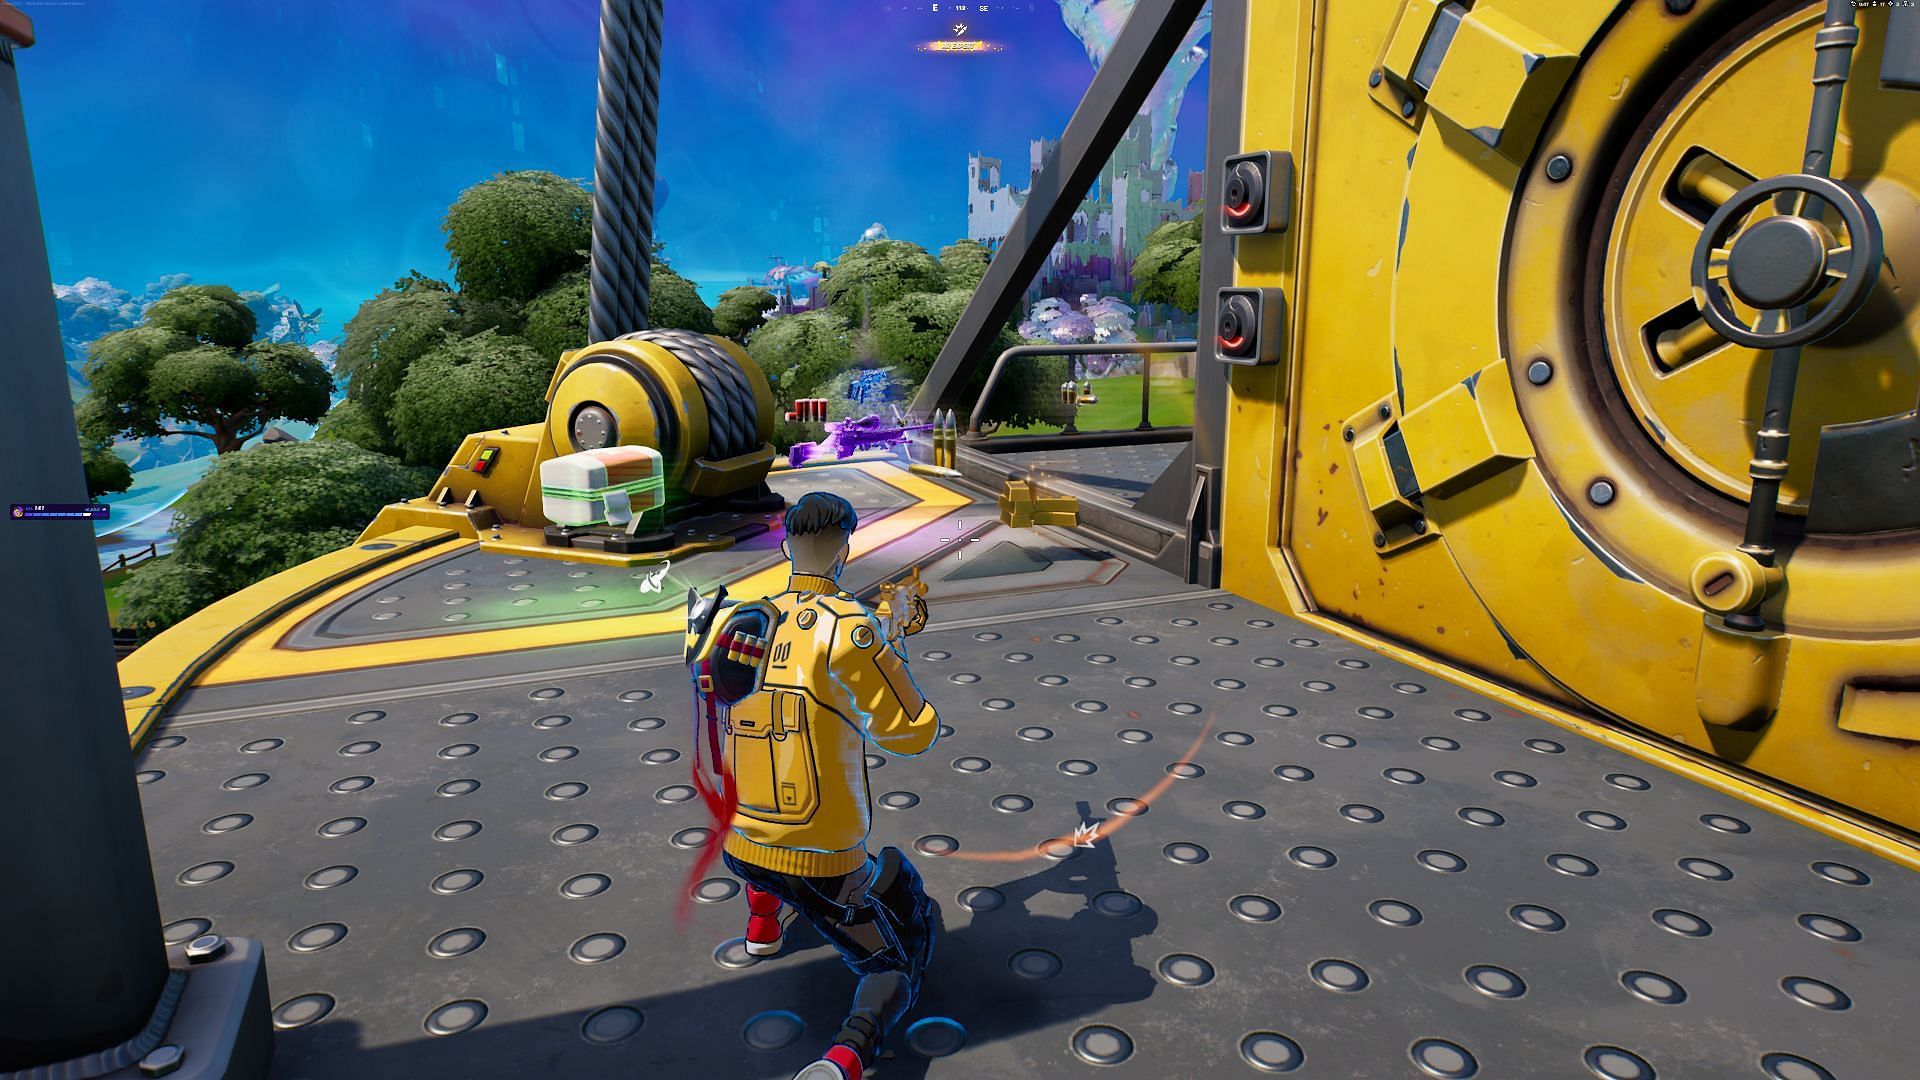 There are numerous ways to spend gold bars in Fortnite (Image via Epic Games/Fortnite)